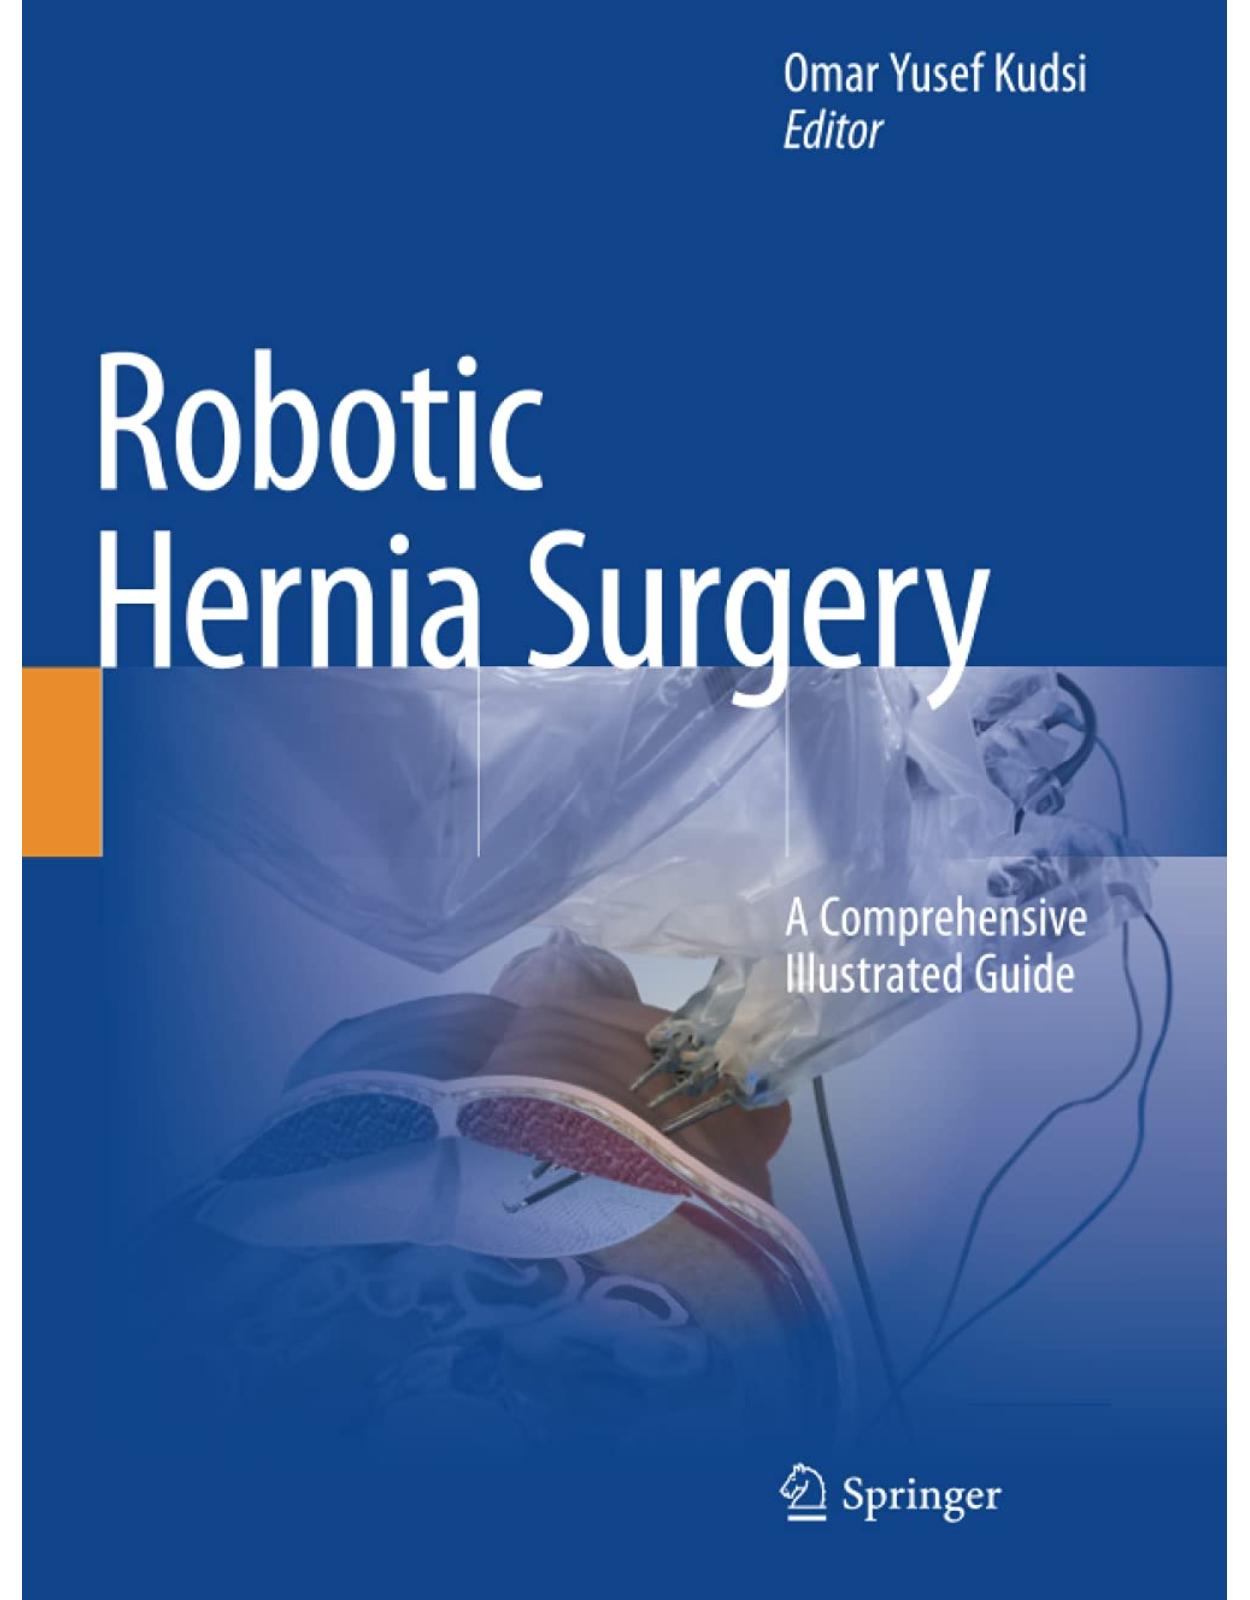 Robotic Hernia Surgery: A Comprehensive Illustrated Guide